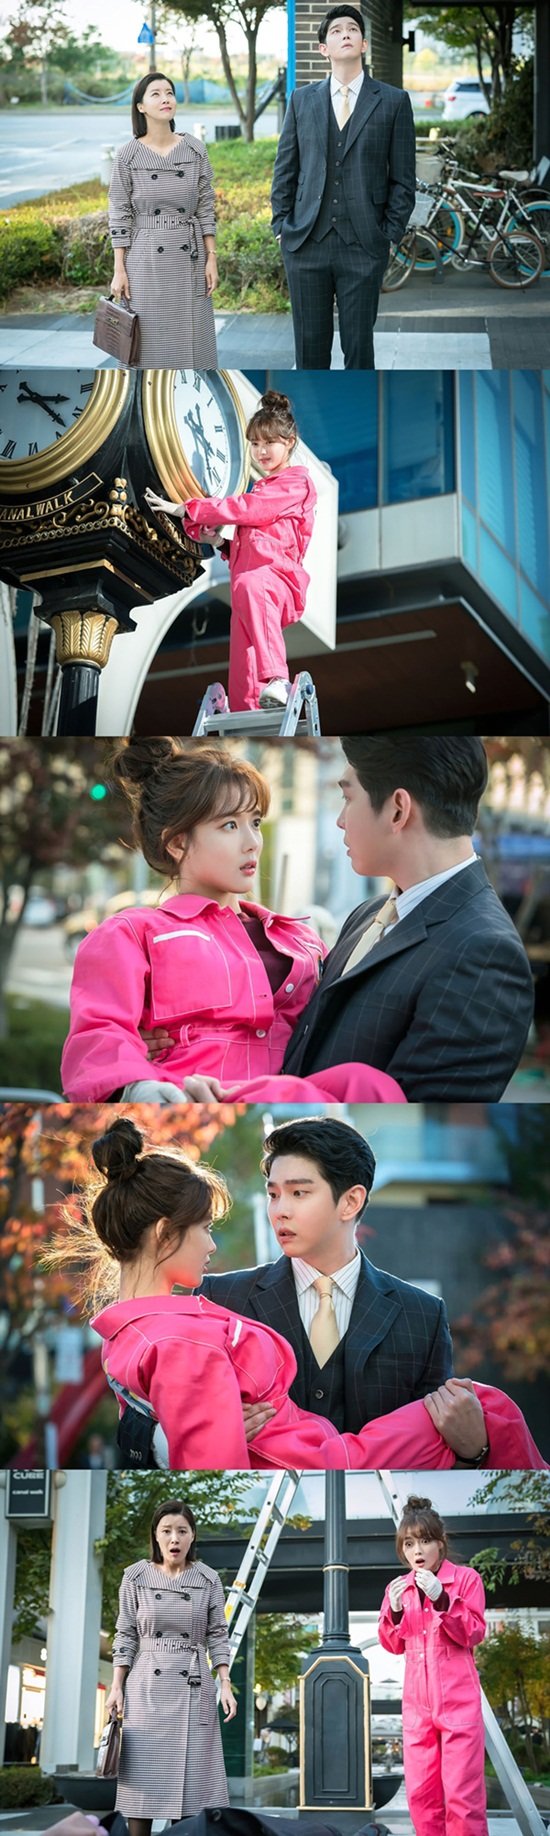 On the 10th, JTBCs monthly drama Once Clean Up Hot released a photo of a sterile boy, Yoon Kyun-sang (pre-election), who can not reach anyone, holding Kim Yoo-jung (Osol) in his arms following a surprise kiss.After the surprise kiss that Kim Yoo-jung gave, Yoon Kyun-sang fell into a drug-free osol.Yoon Kyun-sang confused by unfamiliar Feeling heading to Kim Yoo-jung.Yoon Kyun-sang, who had been through a terrible period of irregularity, was a red light on romance while distanced from Kim Yoo-jung in a cool word.The change in romance was caught in the sterile moment when the pink mood was twisted before it worked properly.Kim Yoo-jung seems to be right if you follow the Sight of Yoon Kyun-sang, which is side by side with the wire (Kwon secretary) in the public photos.As a fairy of cleaning the heat, Kim Yoo-jungs lovely smile, who was challenging the cleaning of the clock tower, was about to lose his center and fall.In the following photo, Yoon Kyun-sang, who holds Kim Yoo-jung, adds curiosity with excitement.Yoon Kyun-sang, who even fainted from shock after a surprise kiss, is interested in what kind of change he will make.Once you clean up hot, the production team said, Yoon Kyun-sang, who is confused by Feeling, who feels for the first time in his life, has a fun fun.The synergies between the drama and the drama of Yoon Kyun-sang and Kim Yoo-jung are expected to provide a pleasant and exciting excitement that can not be seen anywhere.The synergy of Yoon Kyun-sang and Kim Yoo-jungs upcoming Acting will be unfolding unceasingly. The fifth episode airs today (10th) at 9:30pm on JTBC.